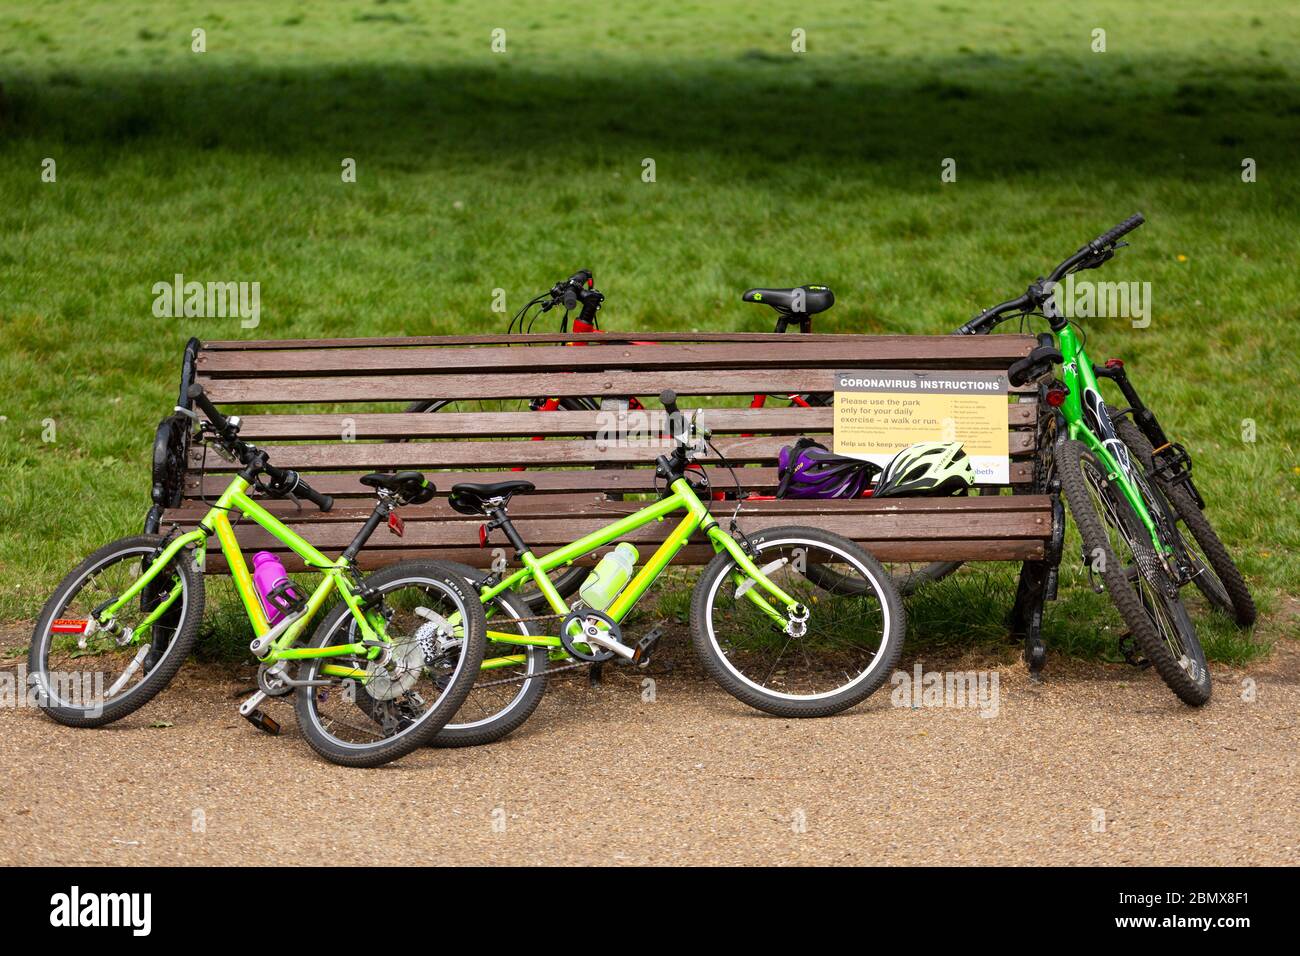 Bicycles leaning against a park bench bearing a coronavirus instruction sign in Clapham Common, during the covid-19 lockdown in London, 10 May 2020 Stock Photo